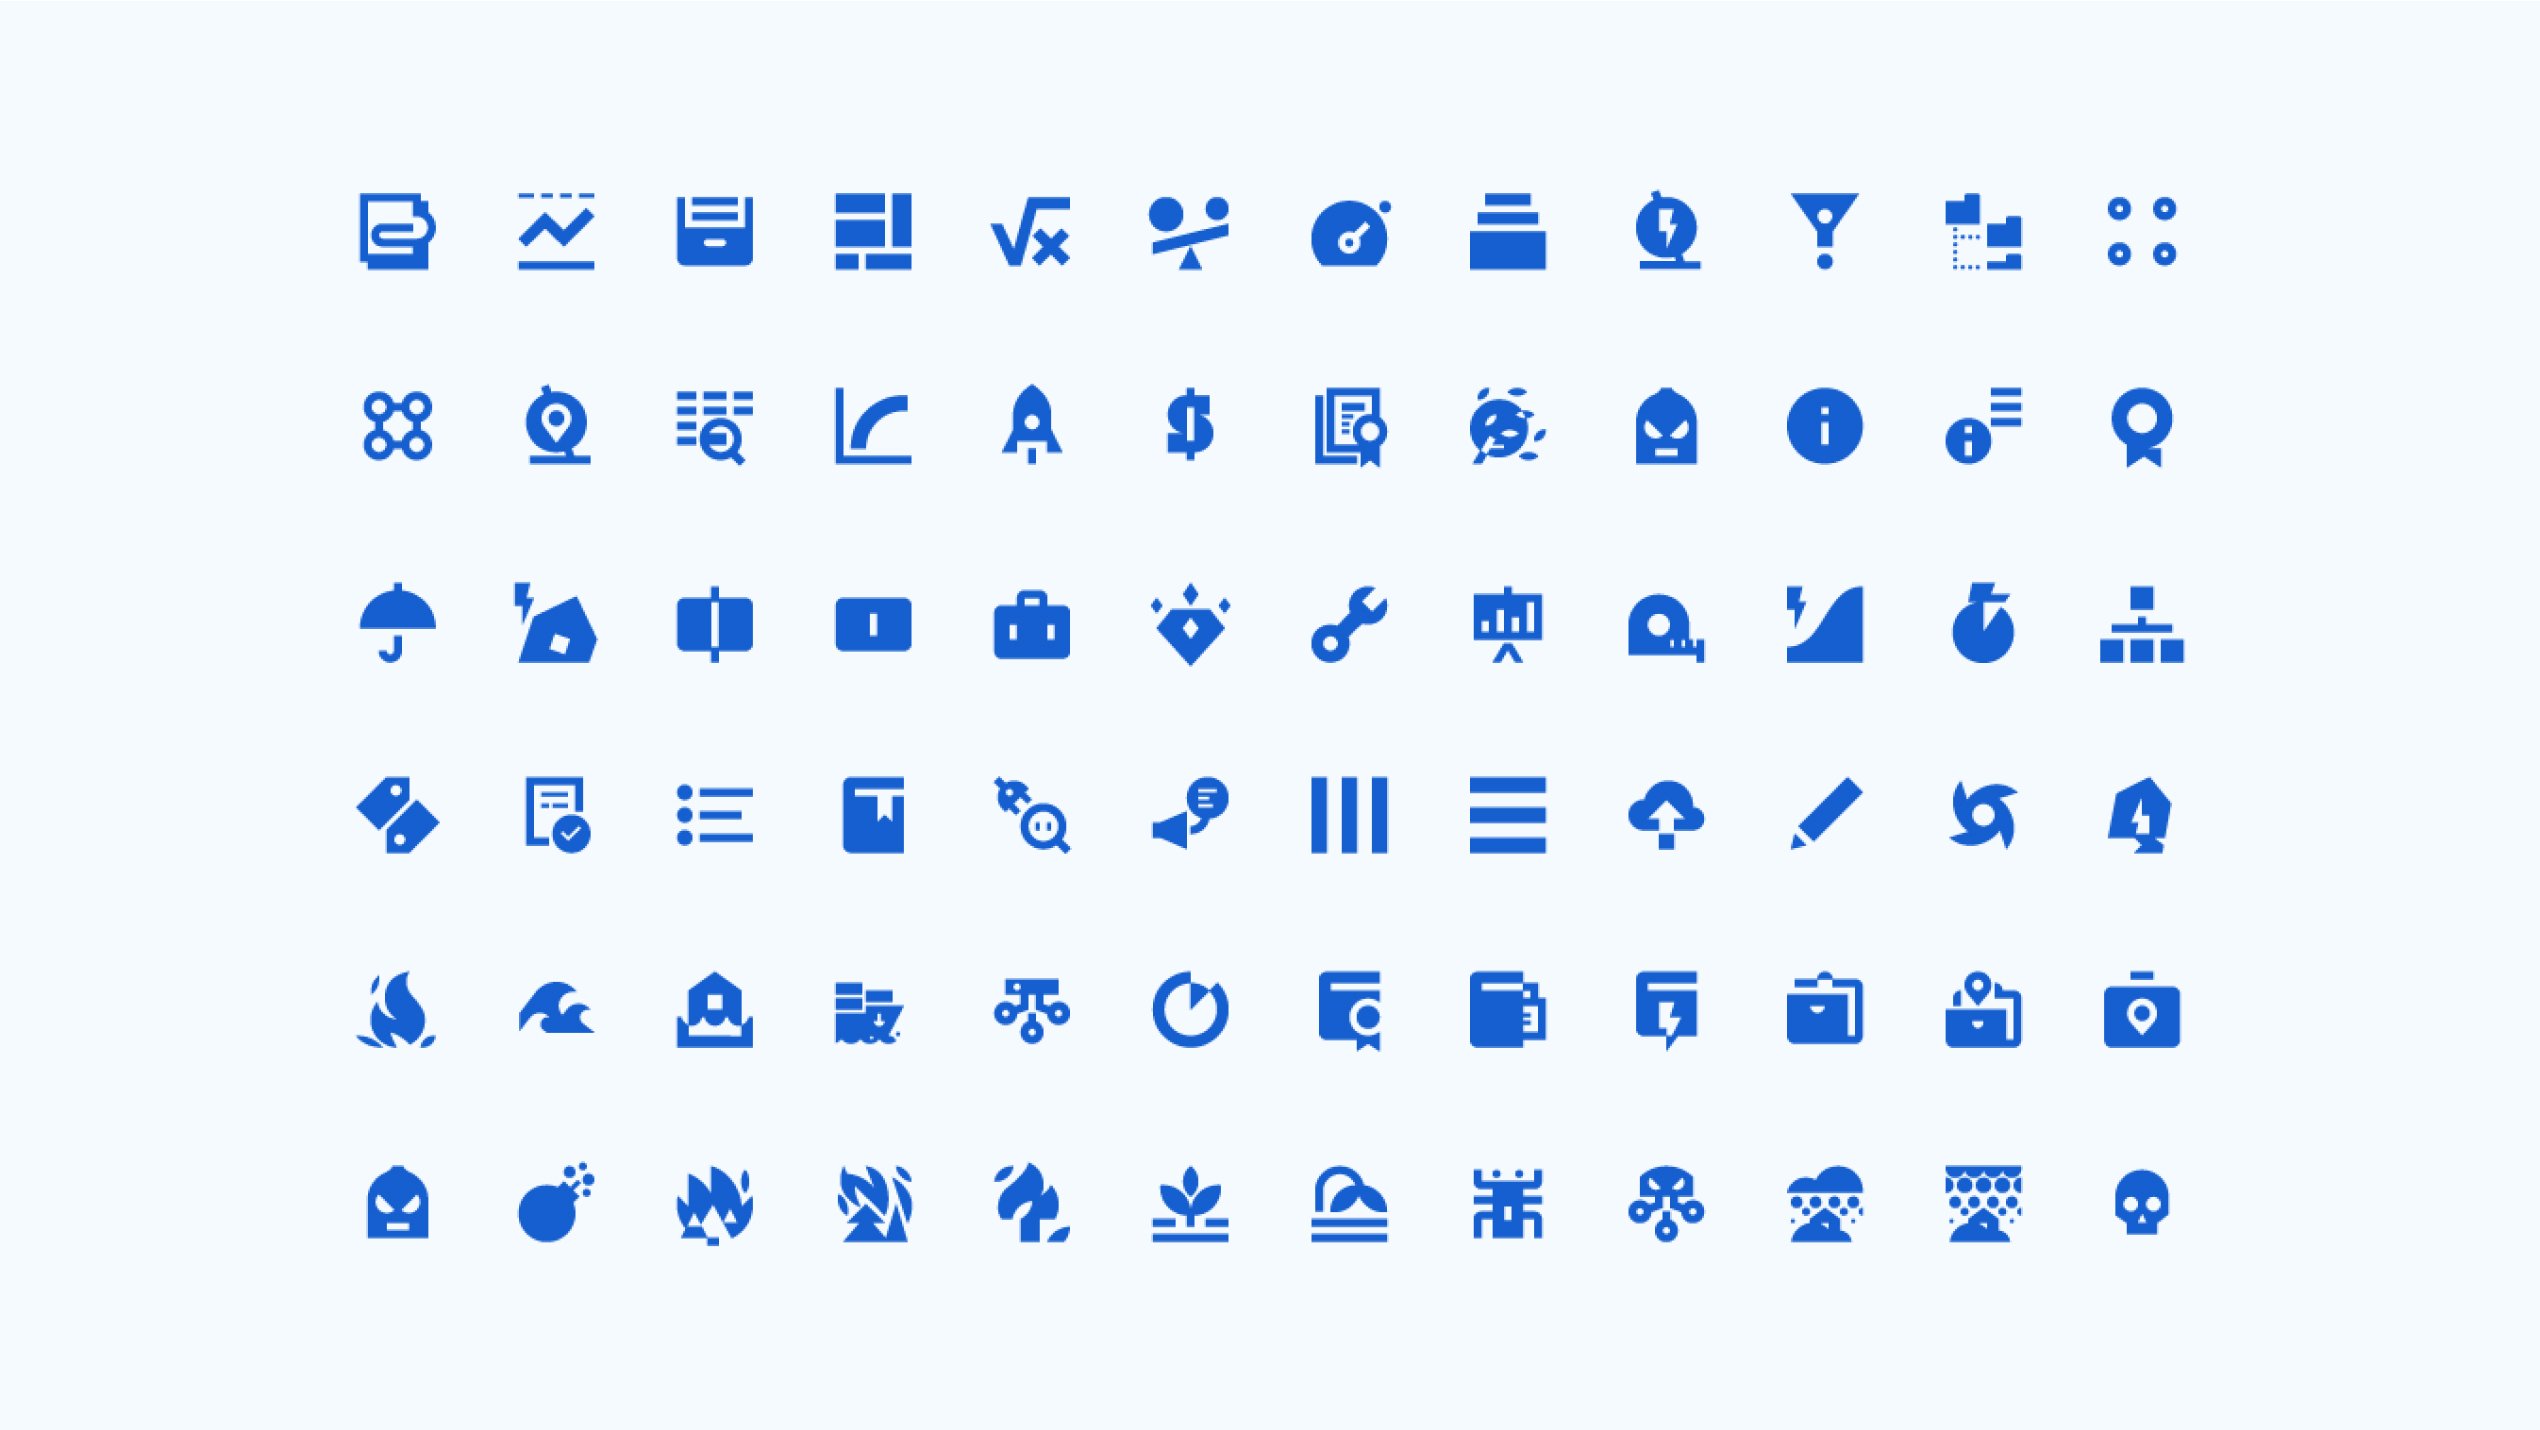 Iconography for RMS design systems